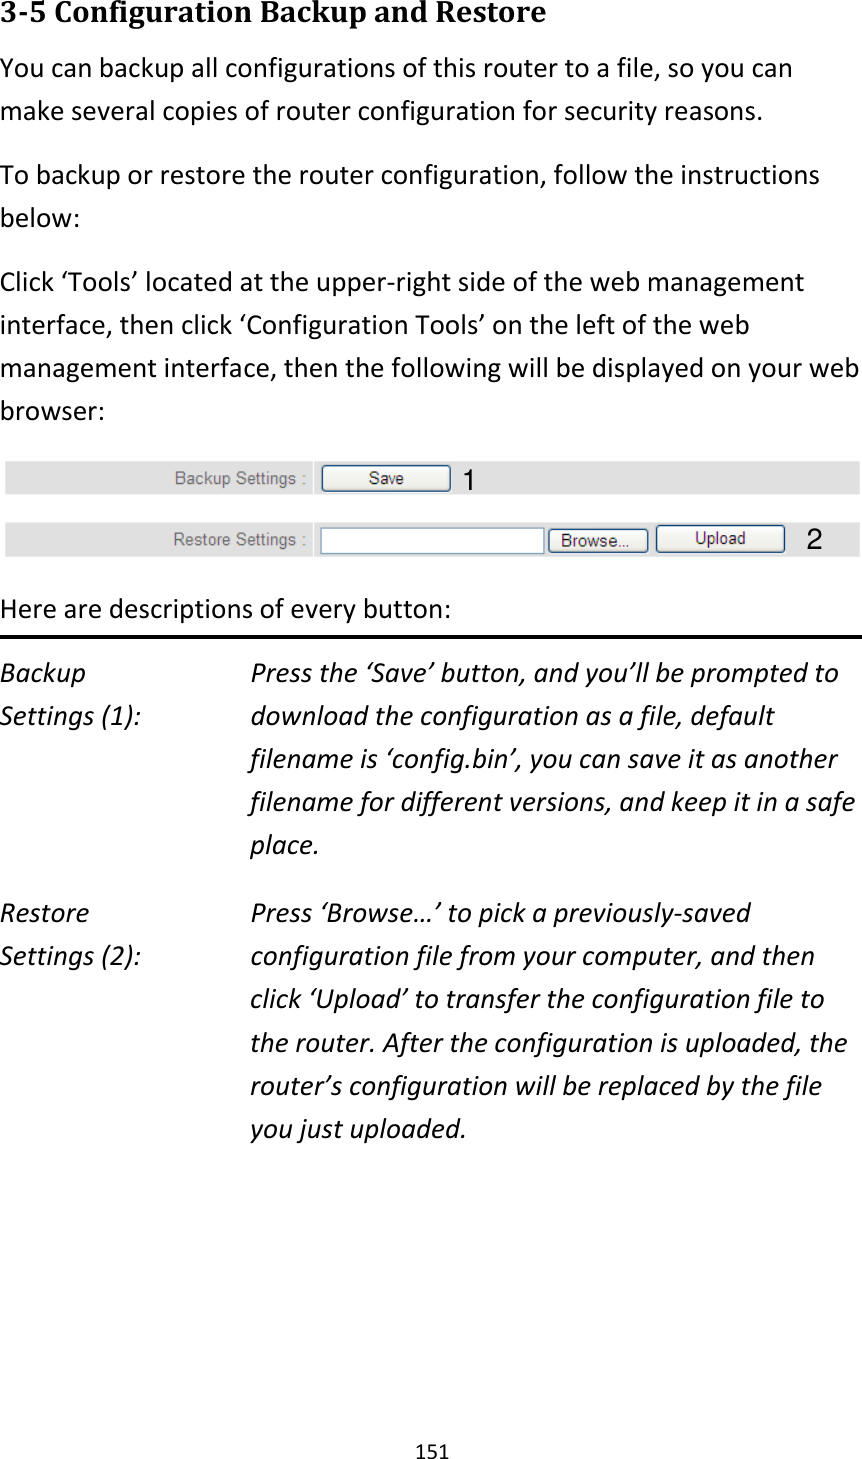 151 3-5 Configuration Backup and Restore You can backup all configurations of this router to a file, so you can make several copies of router configuration for security reasons. To backup or restore the router configuration, follow the instructions below: Click ‘Tools’ located at the upper-right side of the web management interface, then click ‘Configuration Tools’ on the left of the web management interface, then the following will be displayed on your web browser:  Here are descriptions of every button: Backup        Press the ‘Save’ button, and you’ll be prompted to Settings (1):     download the configuration as a file, default filename is ‘config.bin’, you can save it as another filename for different versions, and keep it in a safe place. Restore        Press ‘Browse…’ to pick a previously-saved Settings (2):     configuration file from your computer, and then click ‘Upload’ to transfer the configuration file to the router. After the configuration is uploaded, the router’s configuration will be replaced by the file you just uploaded.     1 2 